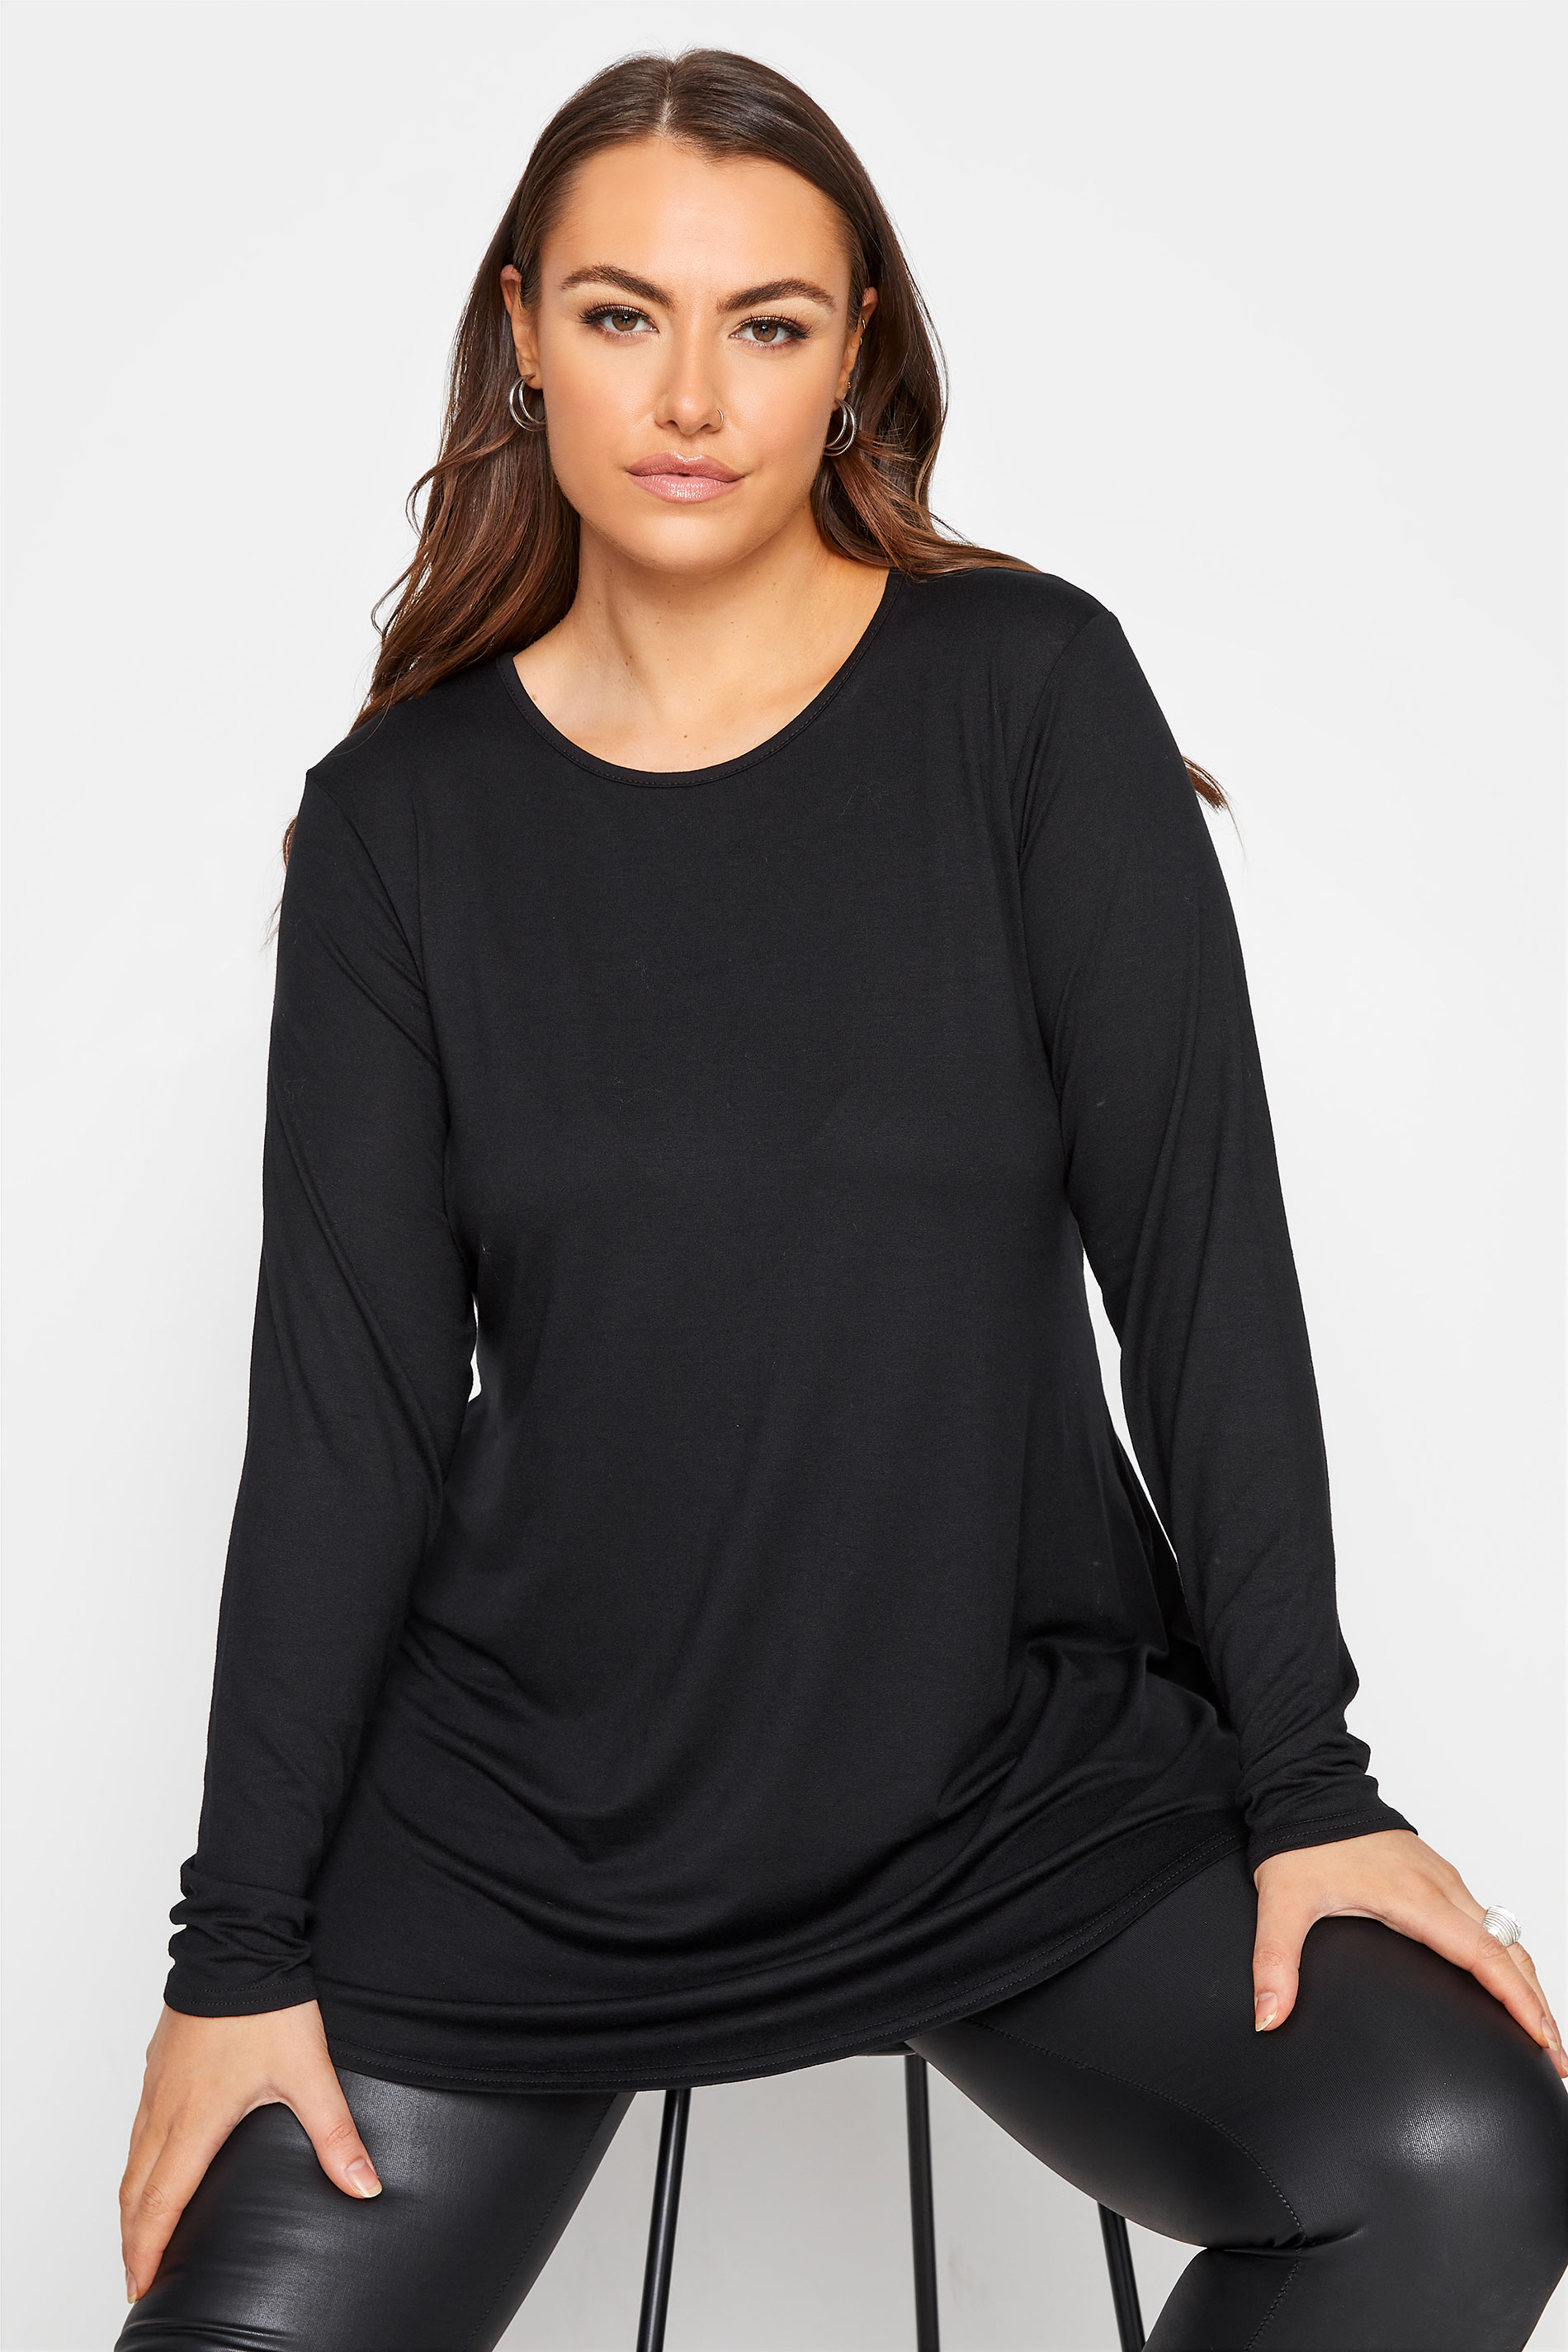 LIMITED COLLECTION Black Long Sleeve Swing Top_A.jpg